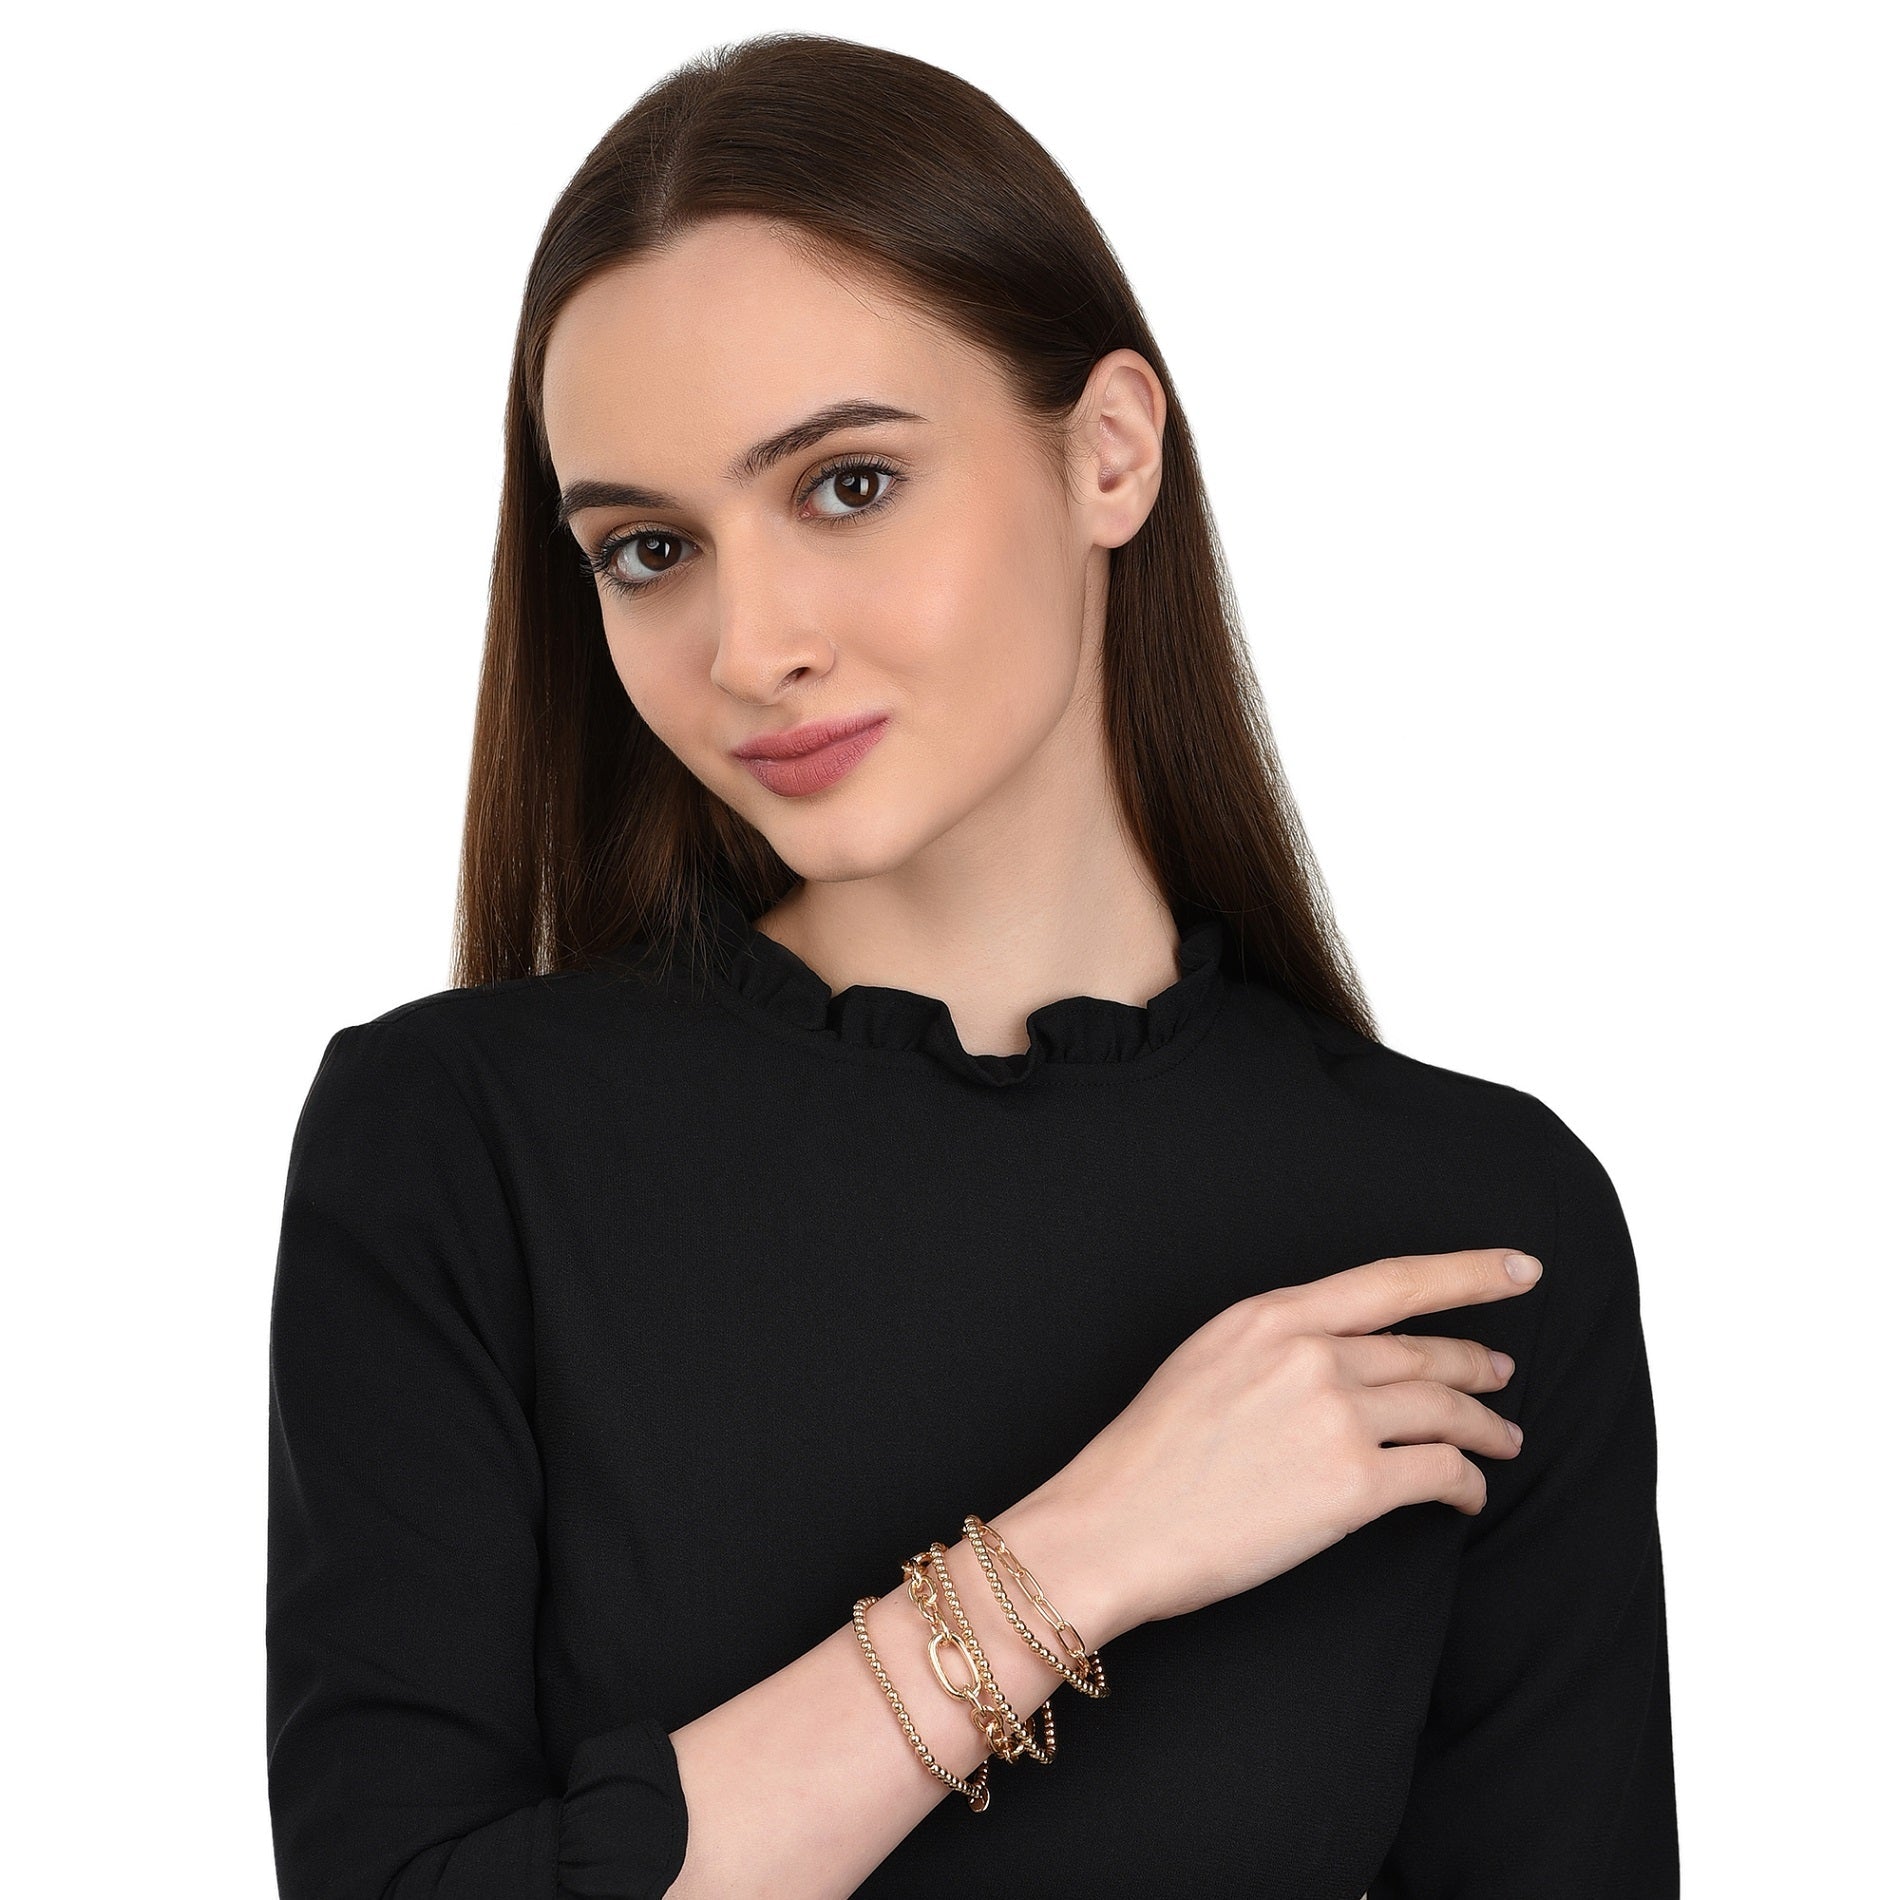 Accessorize London Women's Gold Reconnected St of 5 Chains Stretch Bracelet